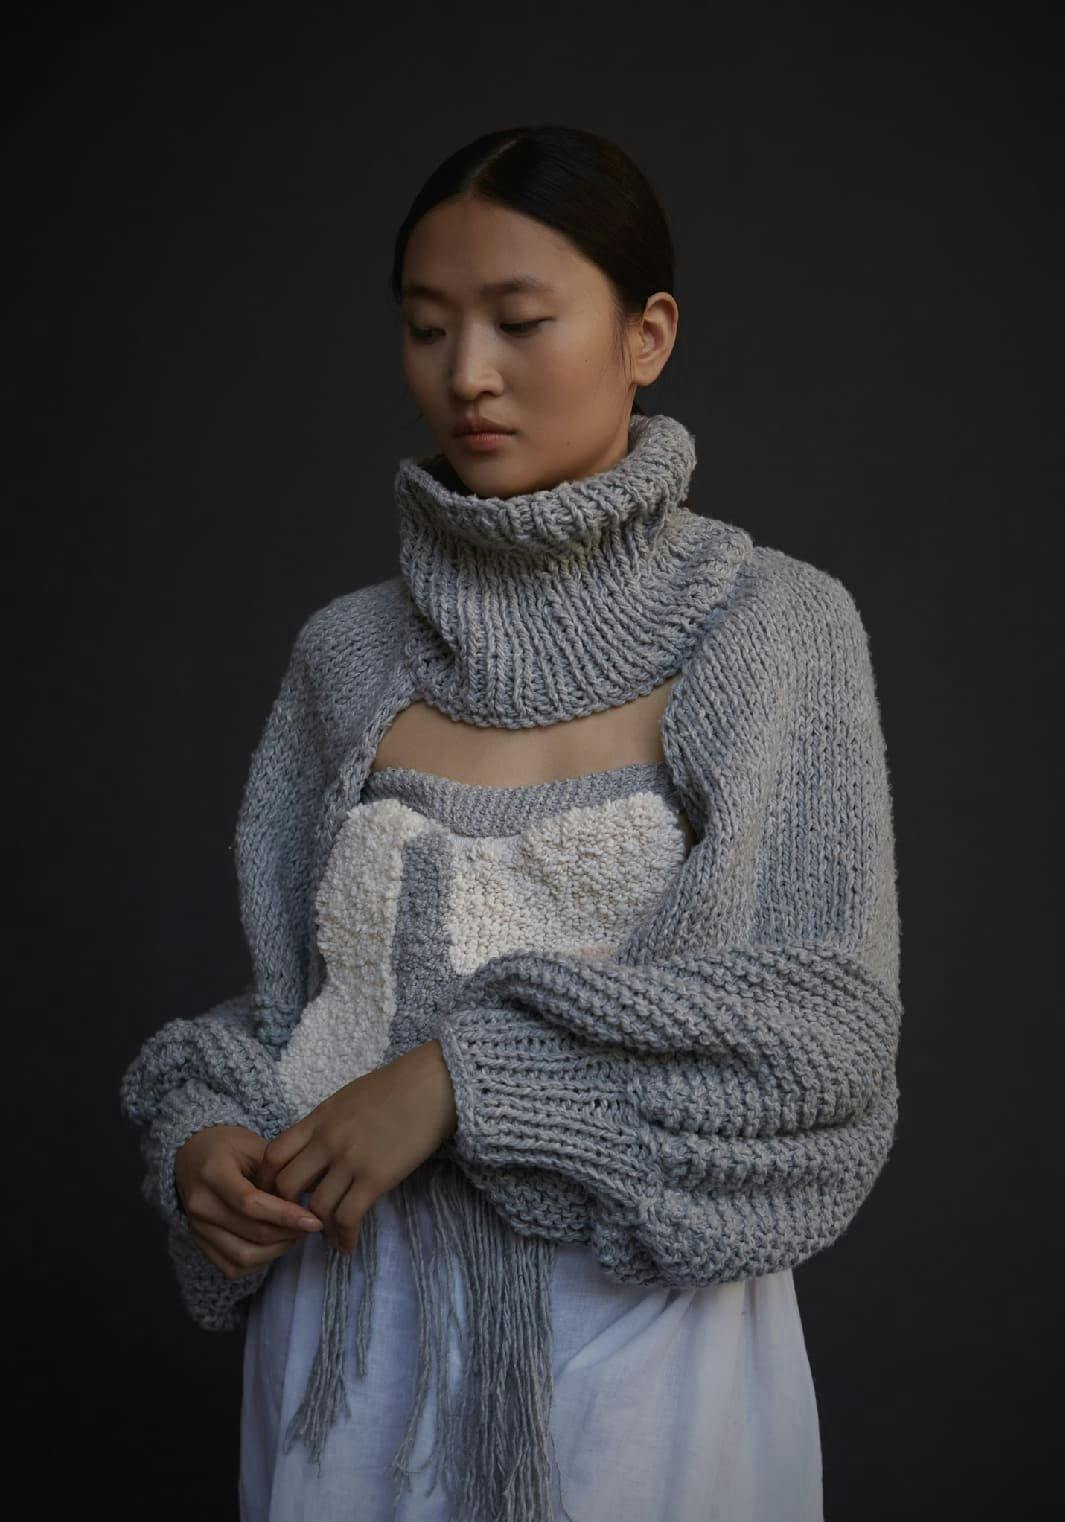 Grey Sleeves: Item 009 Mid Grey, a product by Studio cumbre